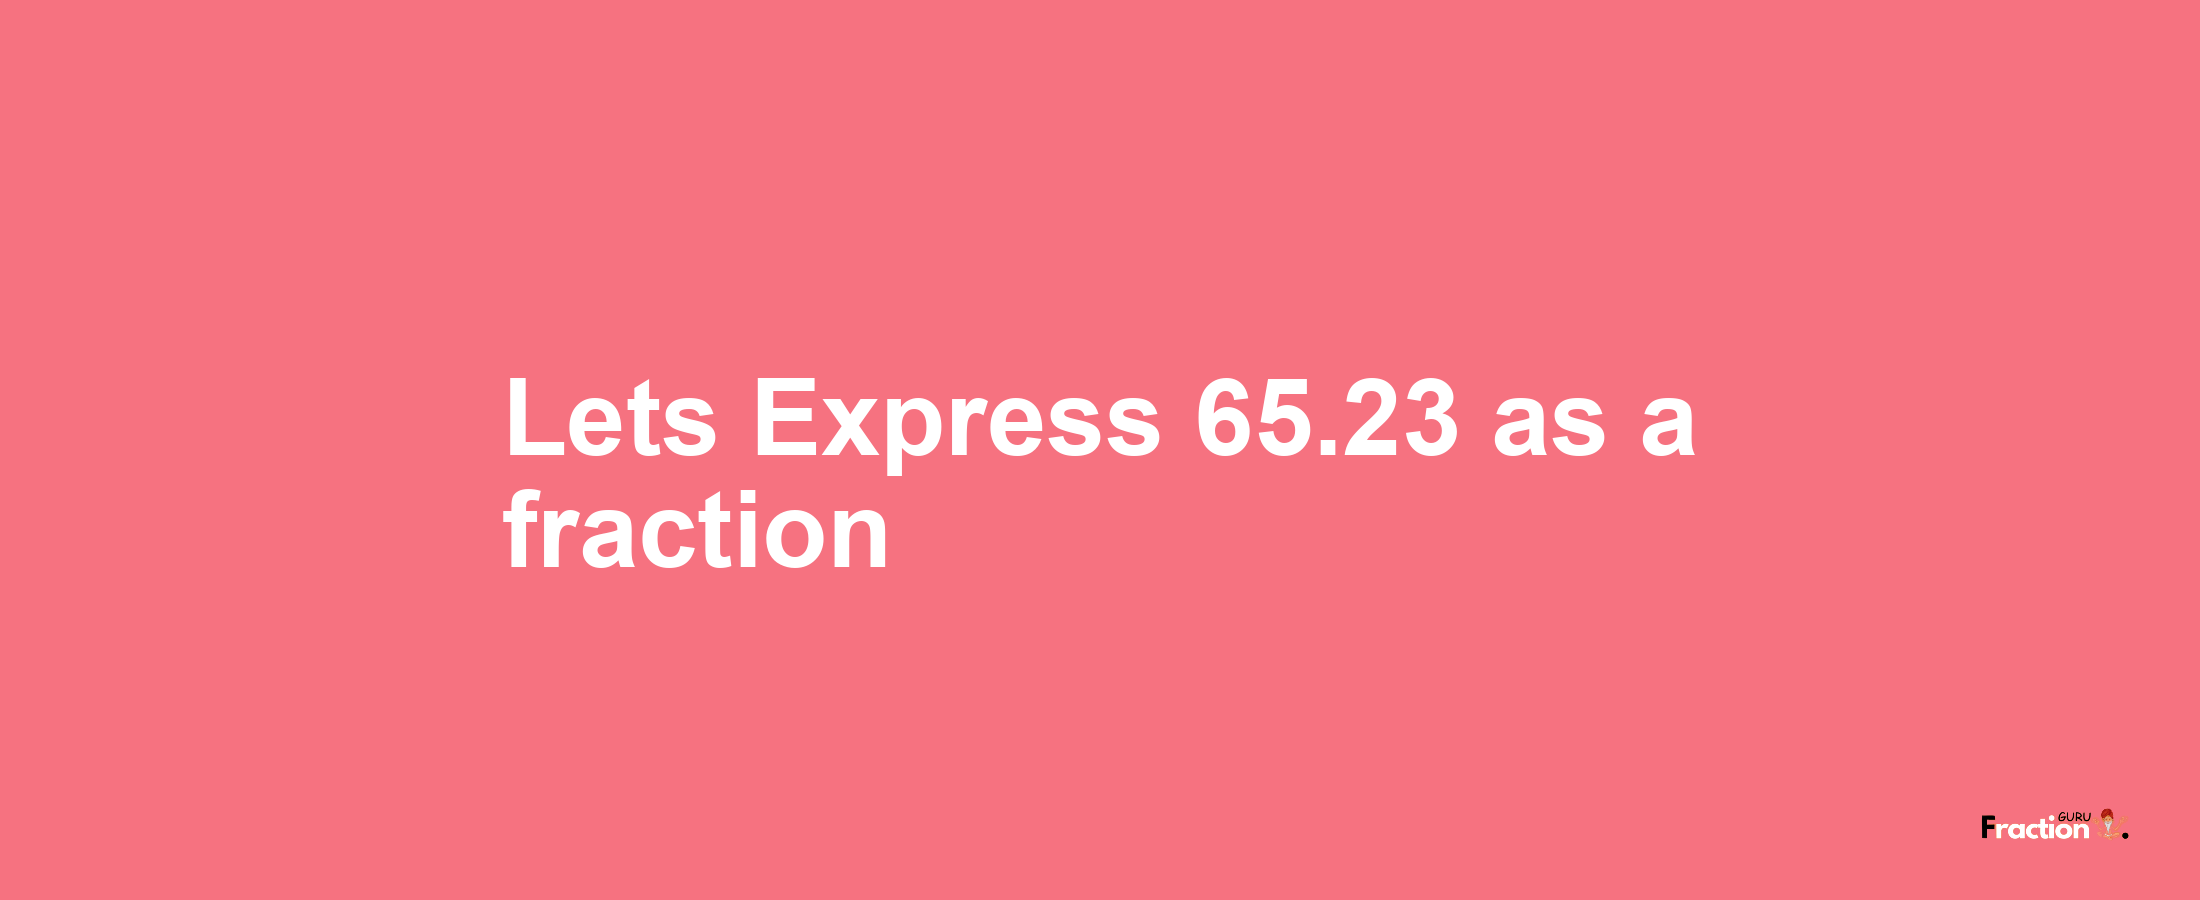 Lets Express 65.23 as afraction